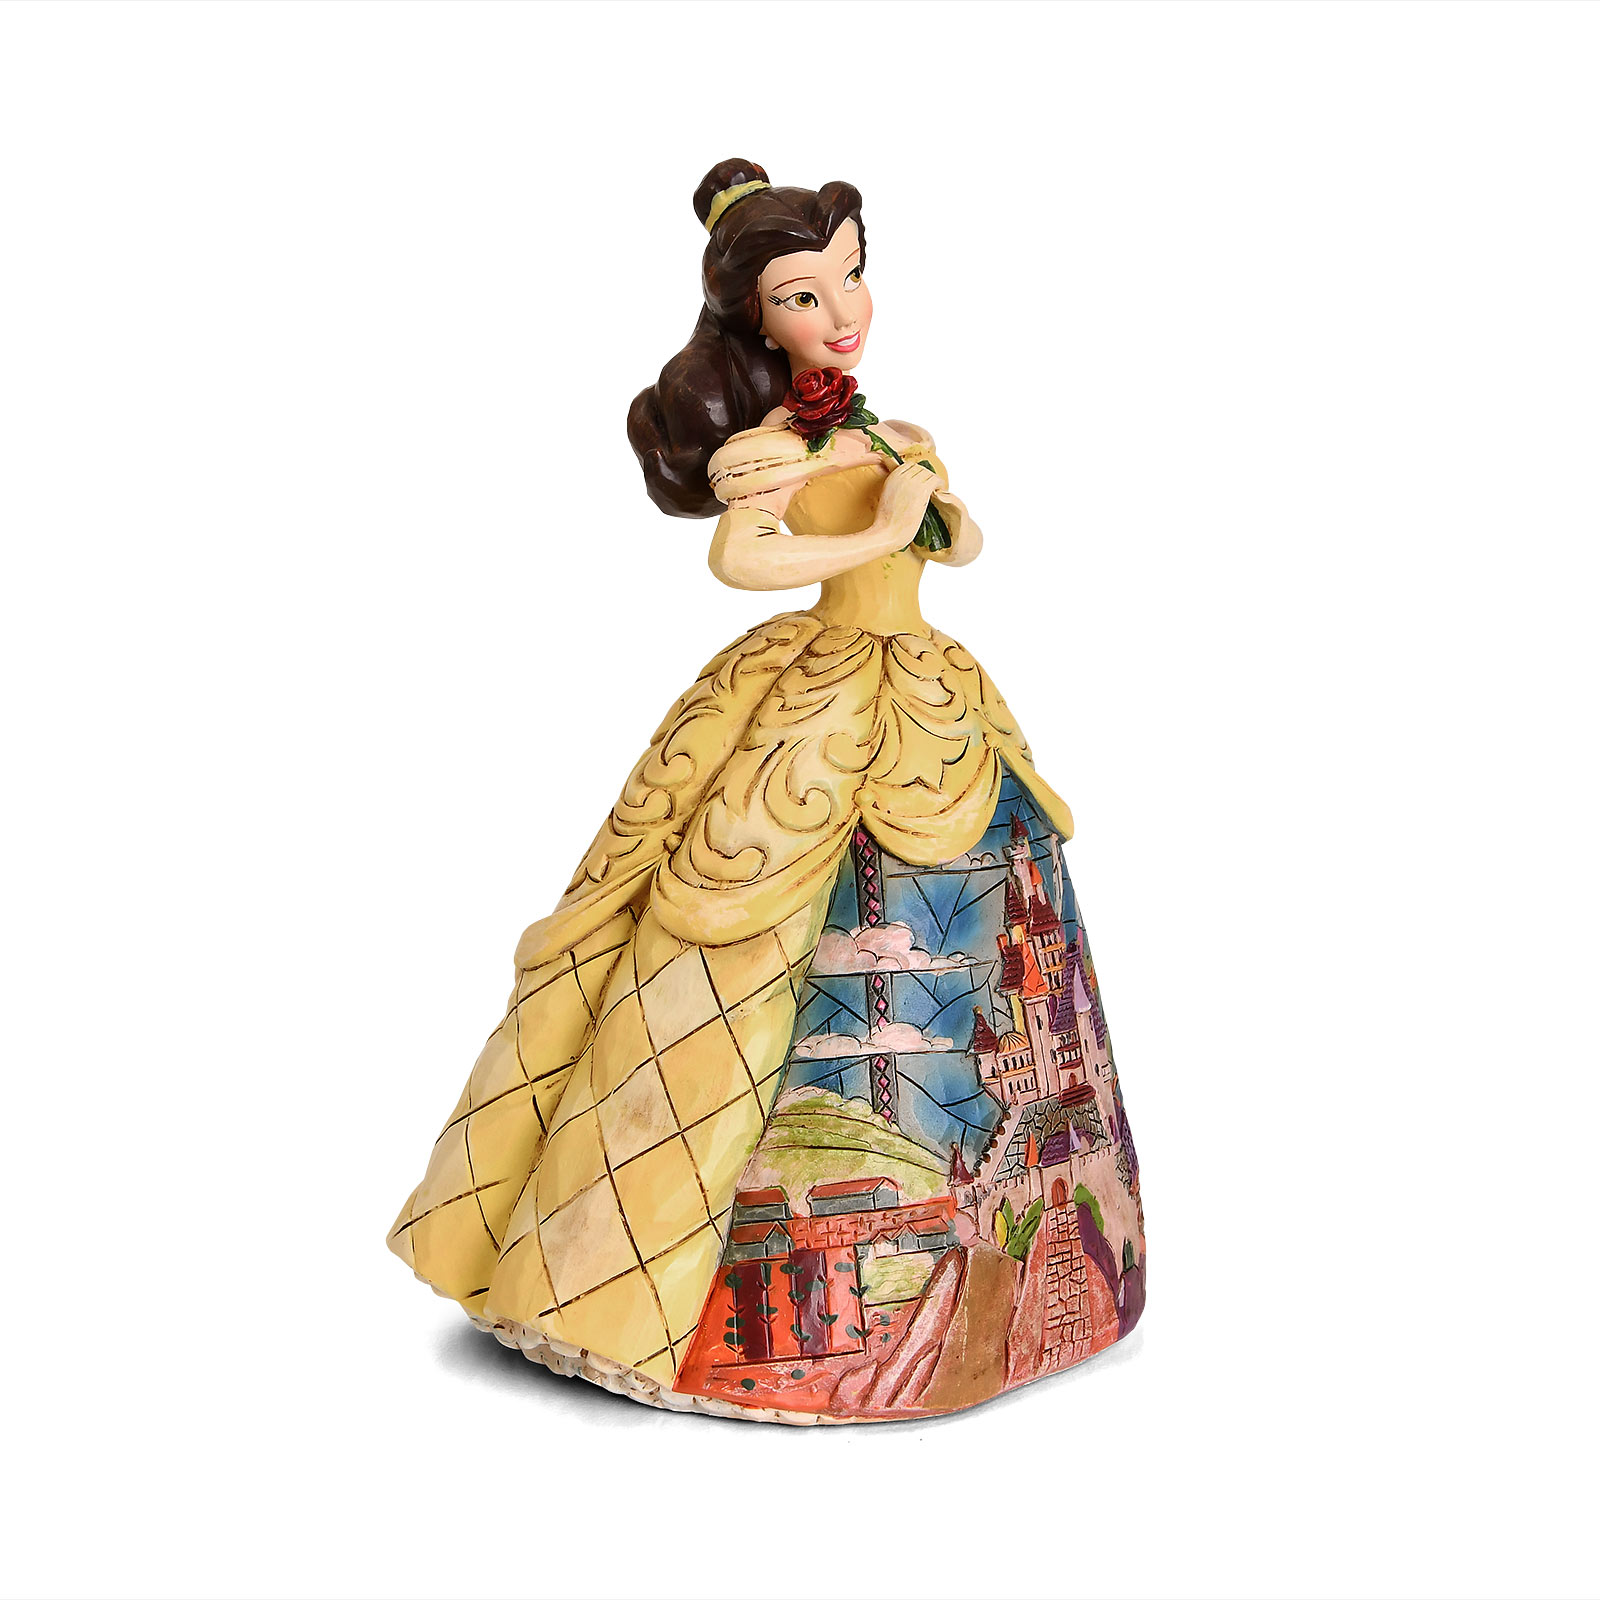 Beauty and the Beast - Belle Enchanted figure